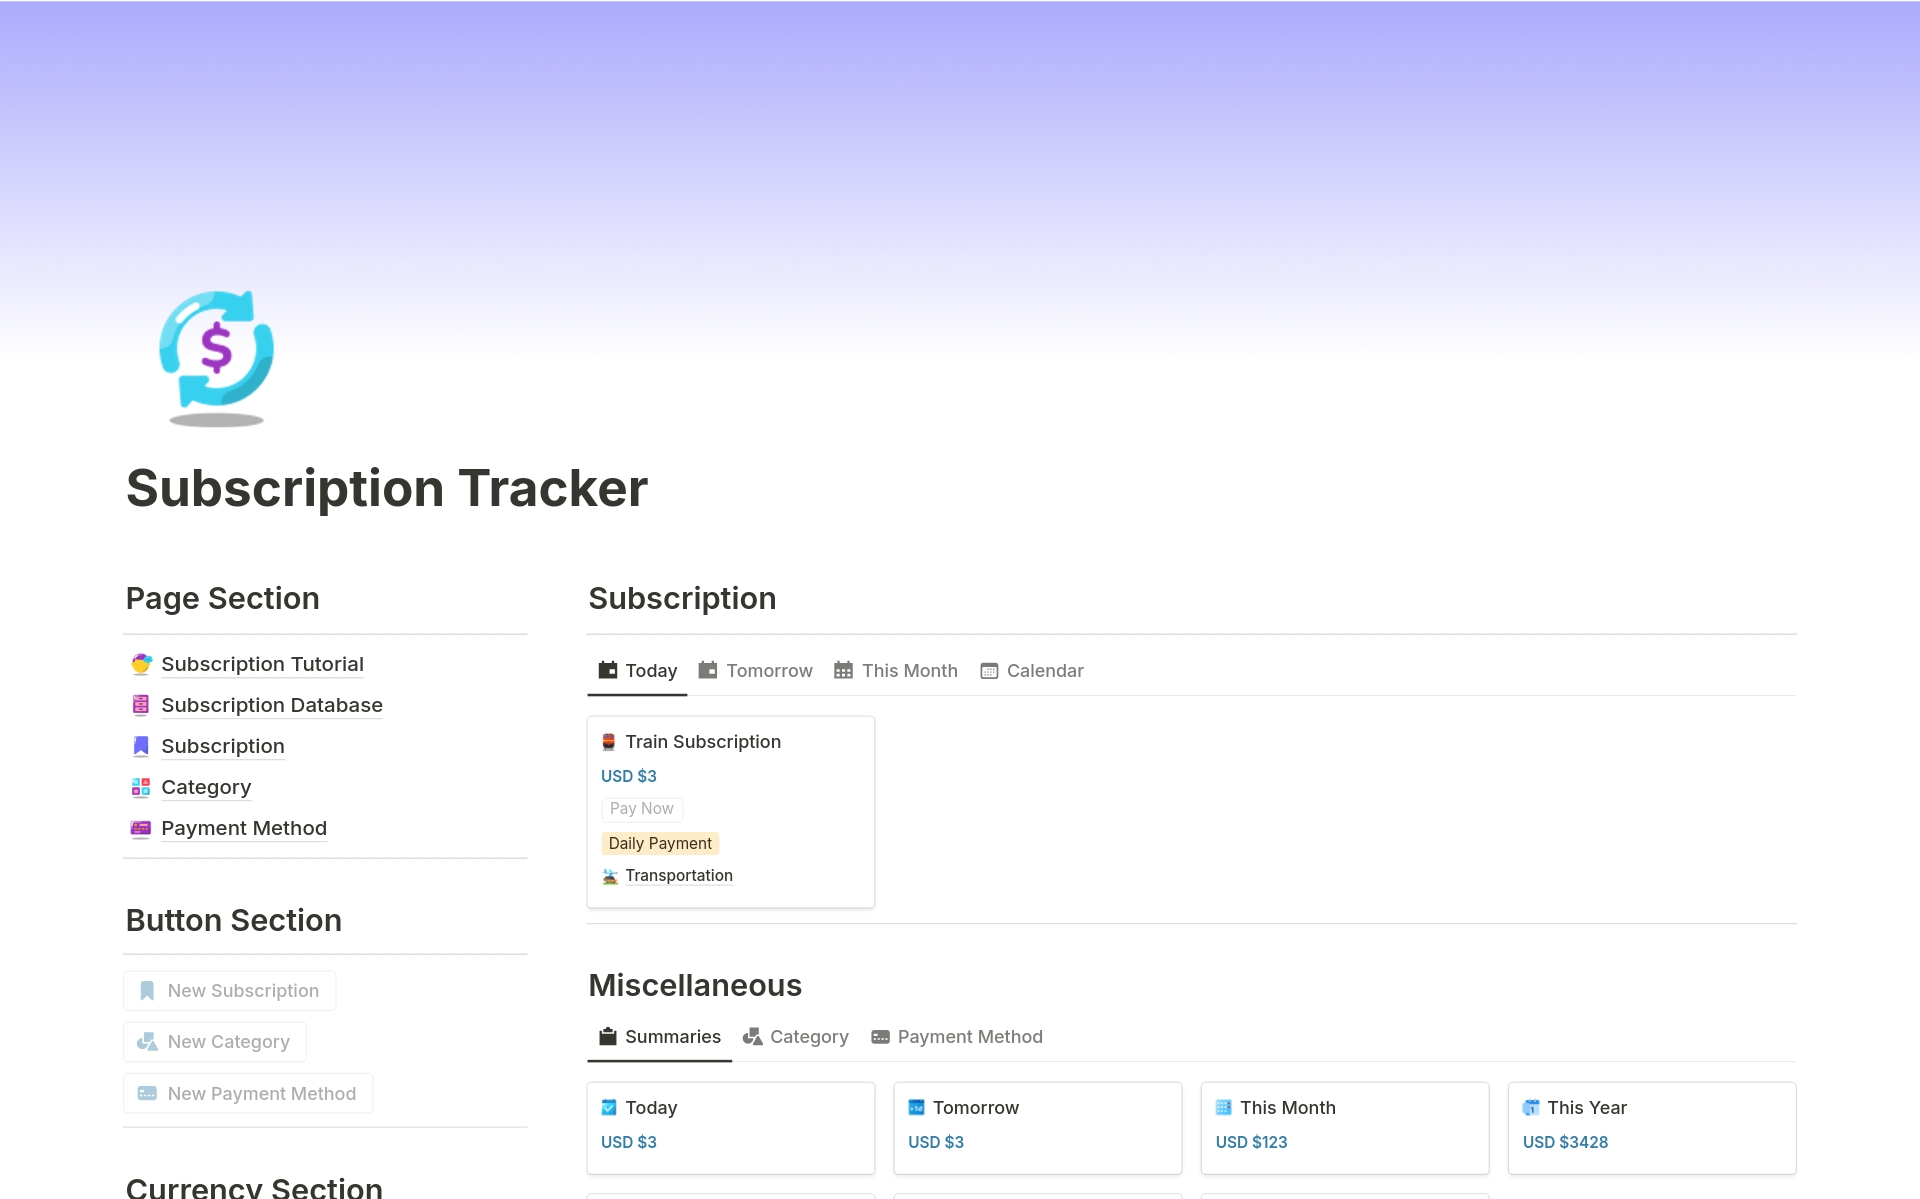 Do you have any difficulties tracking your subscription??

Don't worry, I made this for your concern. This template is made to track your subscription using Notion.